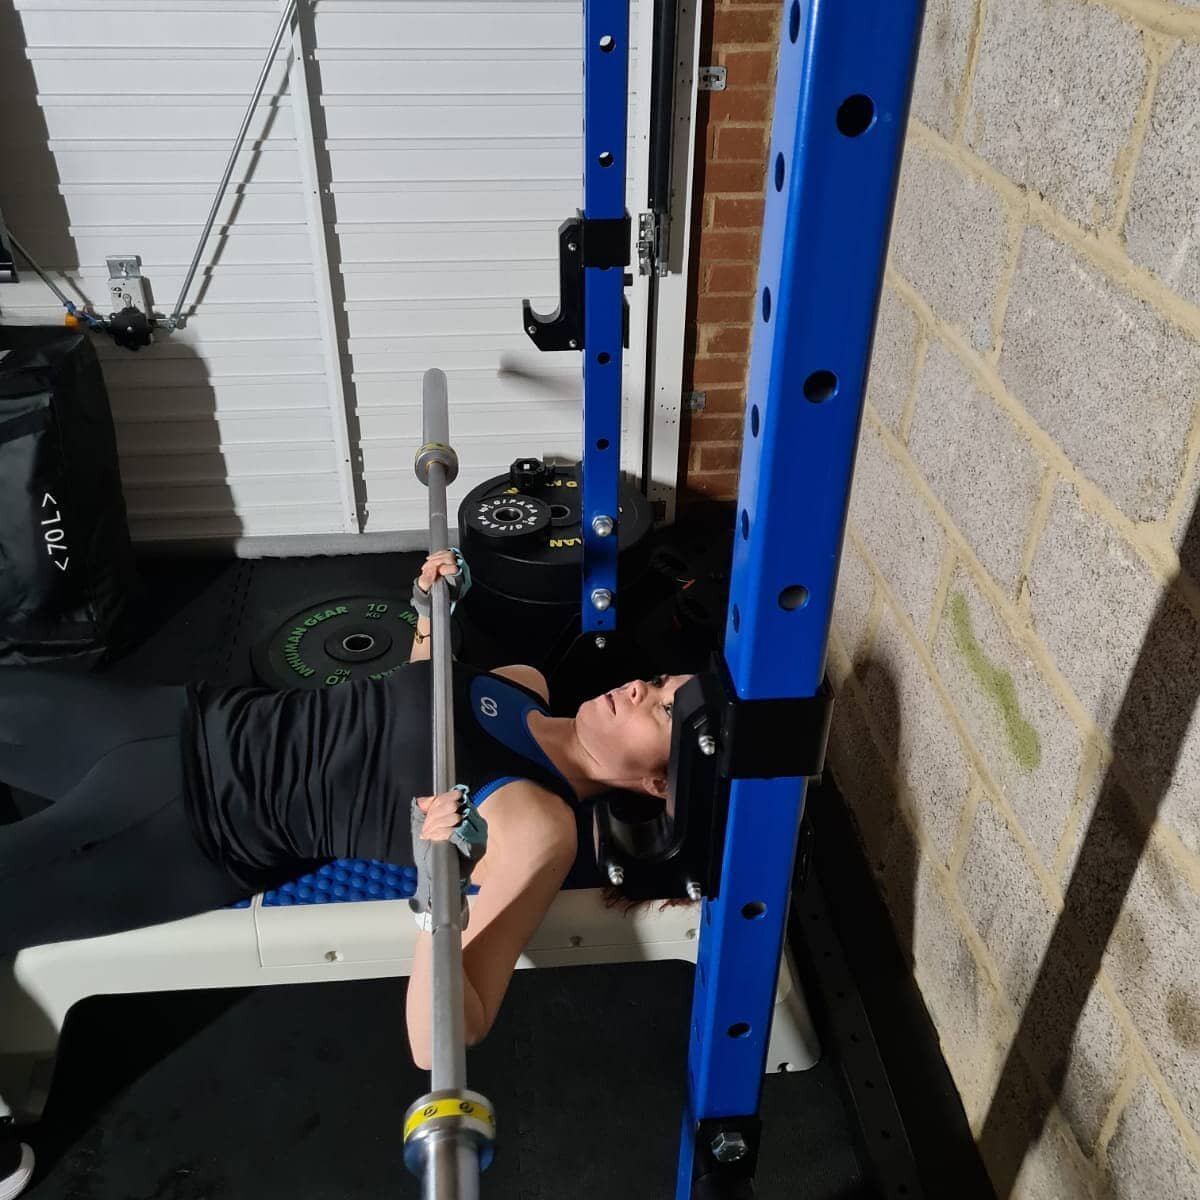 Getting used to chest pressing with an Olympic bar again. I do what I preach...taking it slowly after 10 months break..here warm up with bar only.
It is possible to do this without the rack but so much nicer with it. Did you notice the custom C.B. Fi